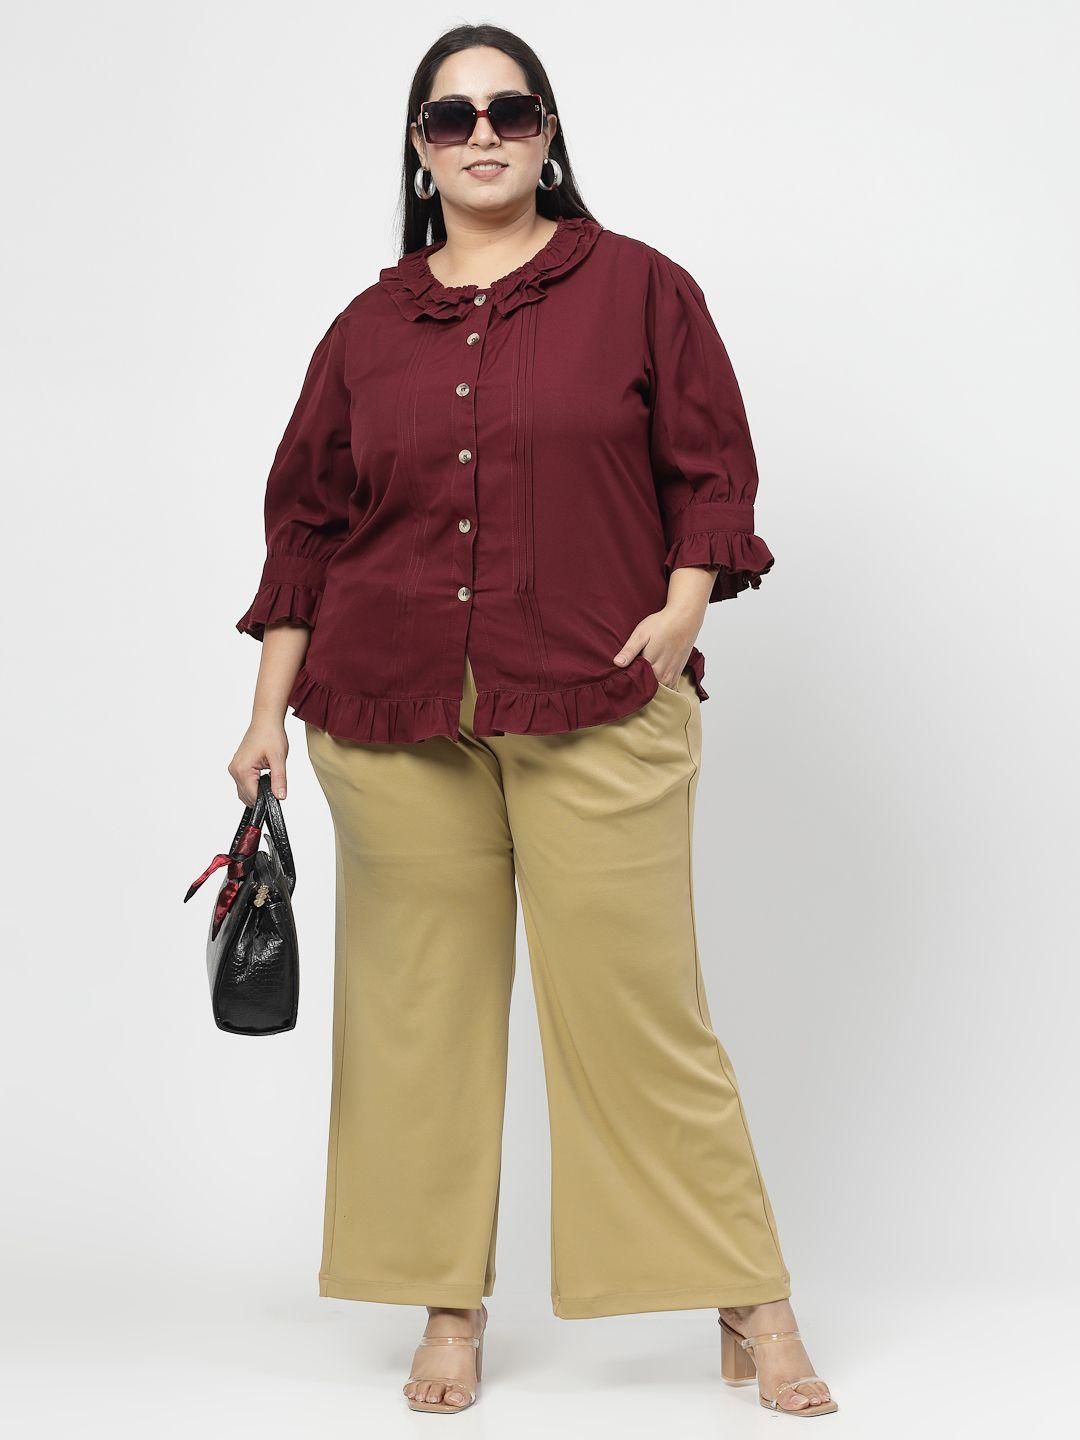 Flambeur Women's Plus Size Casual Solid Trouser